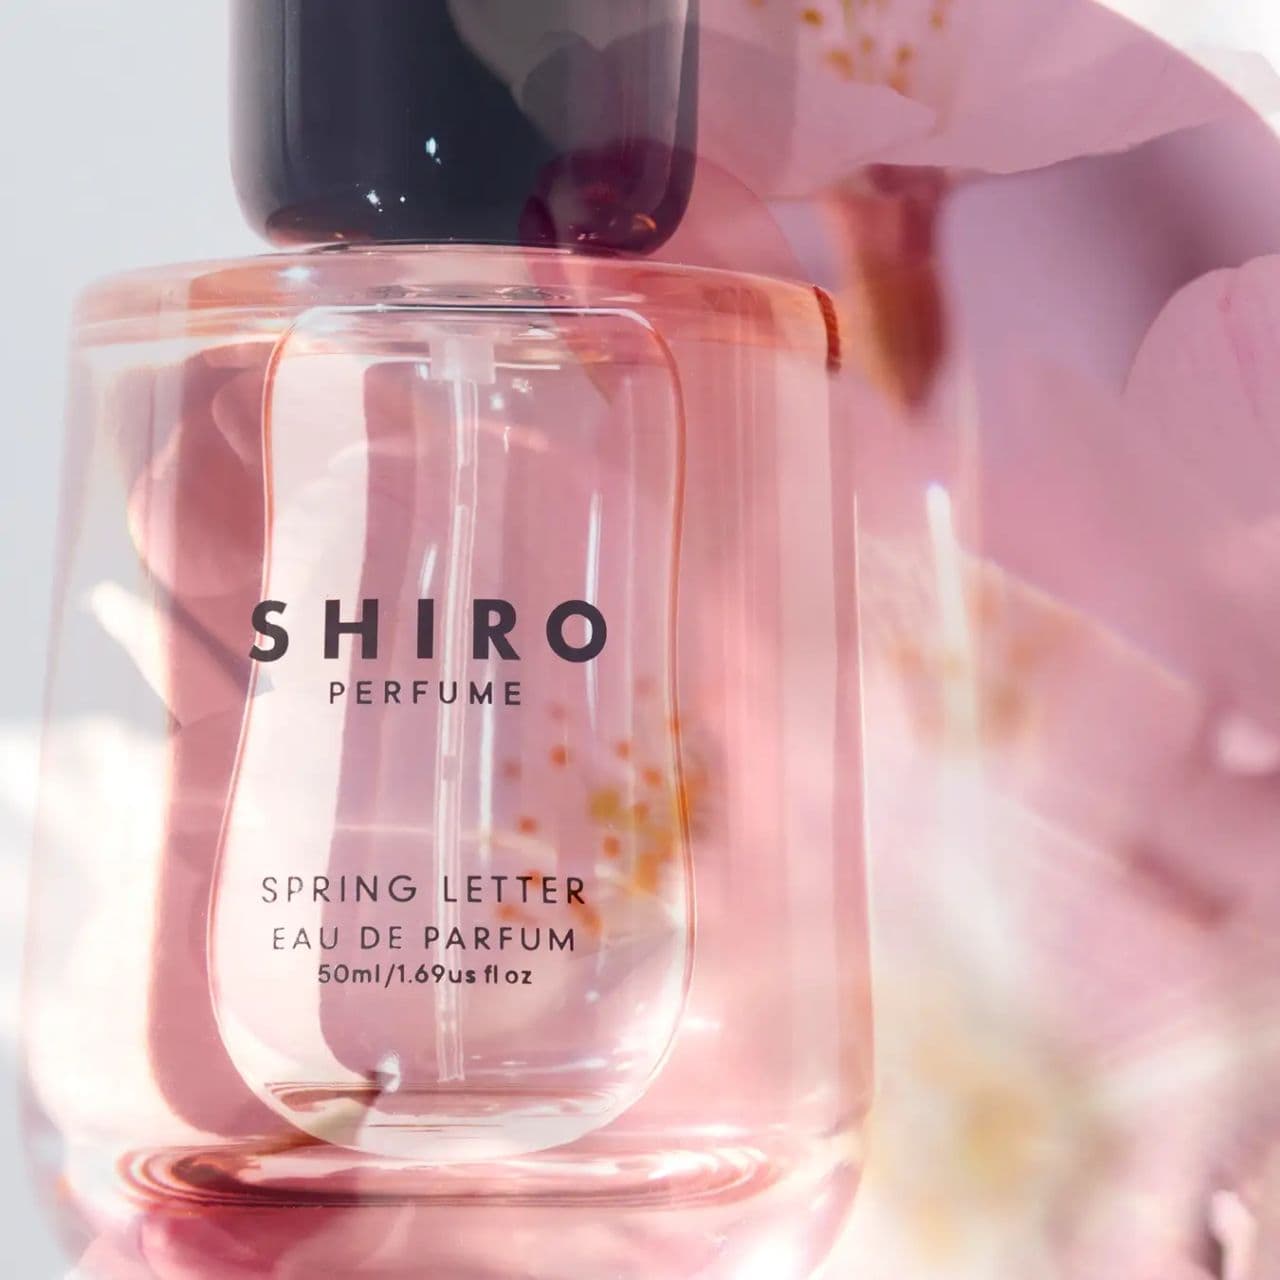 SHIRO Limited Edition Parfum "SPRING LETTER